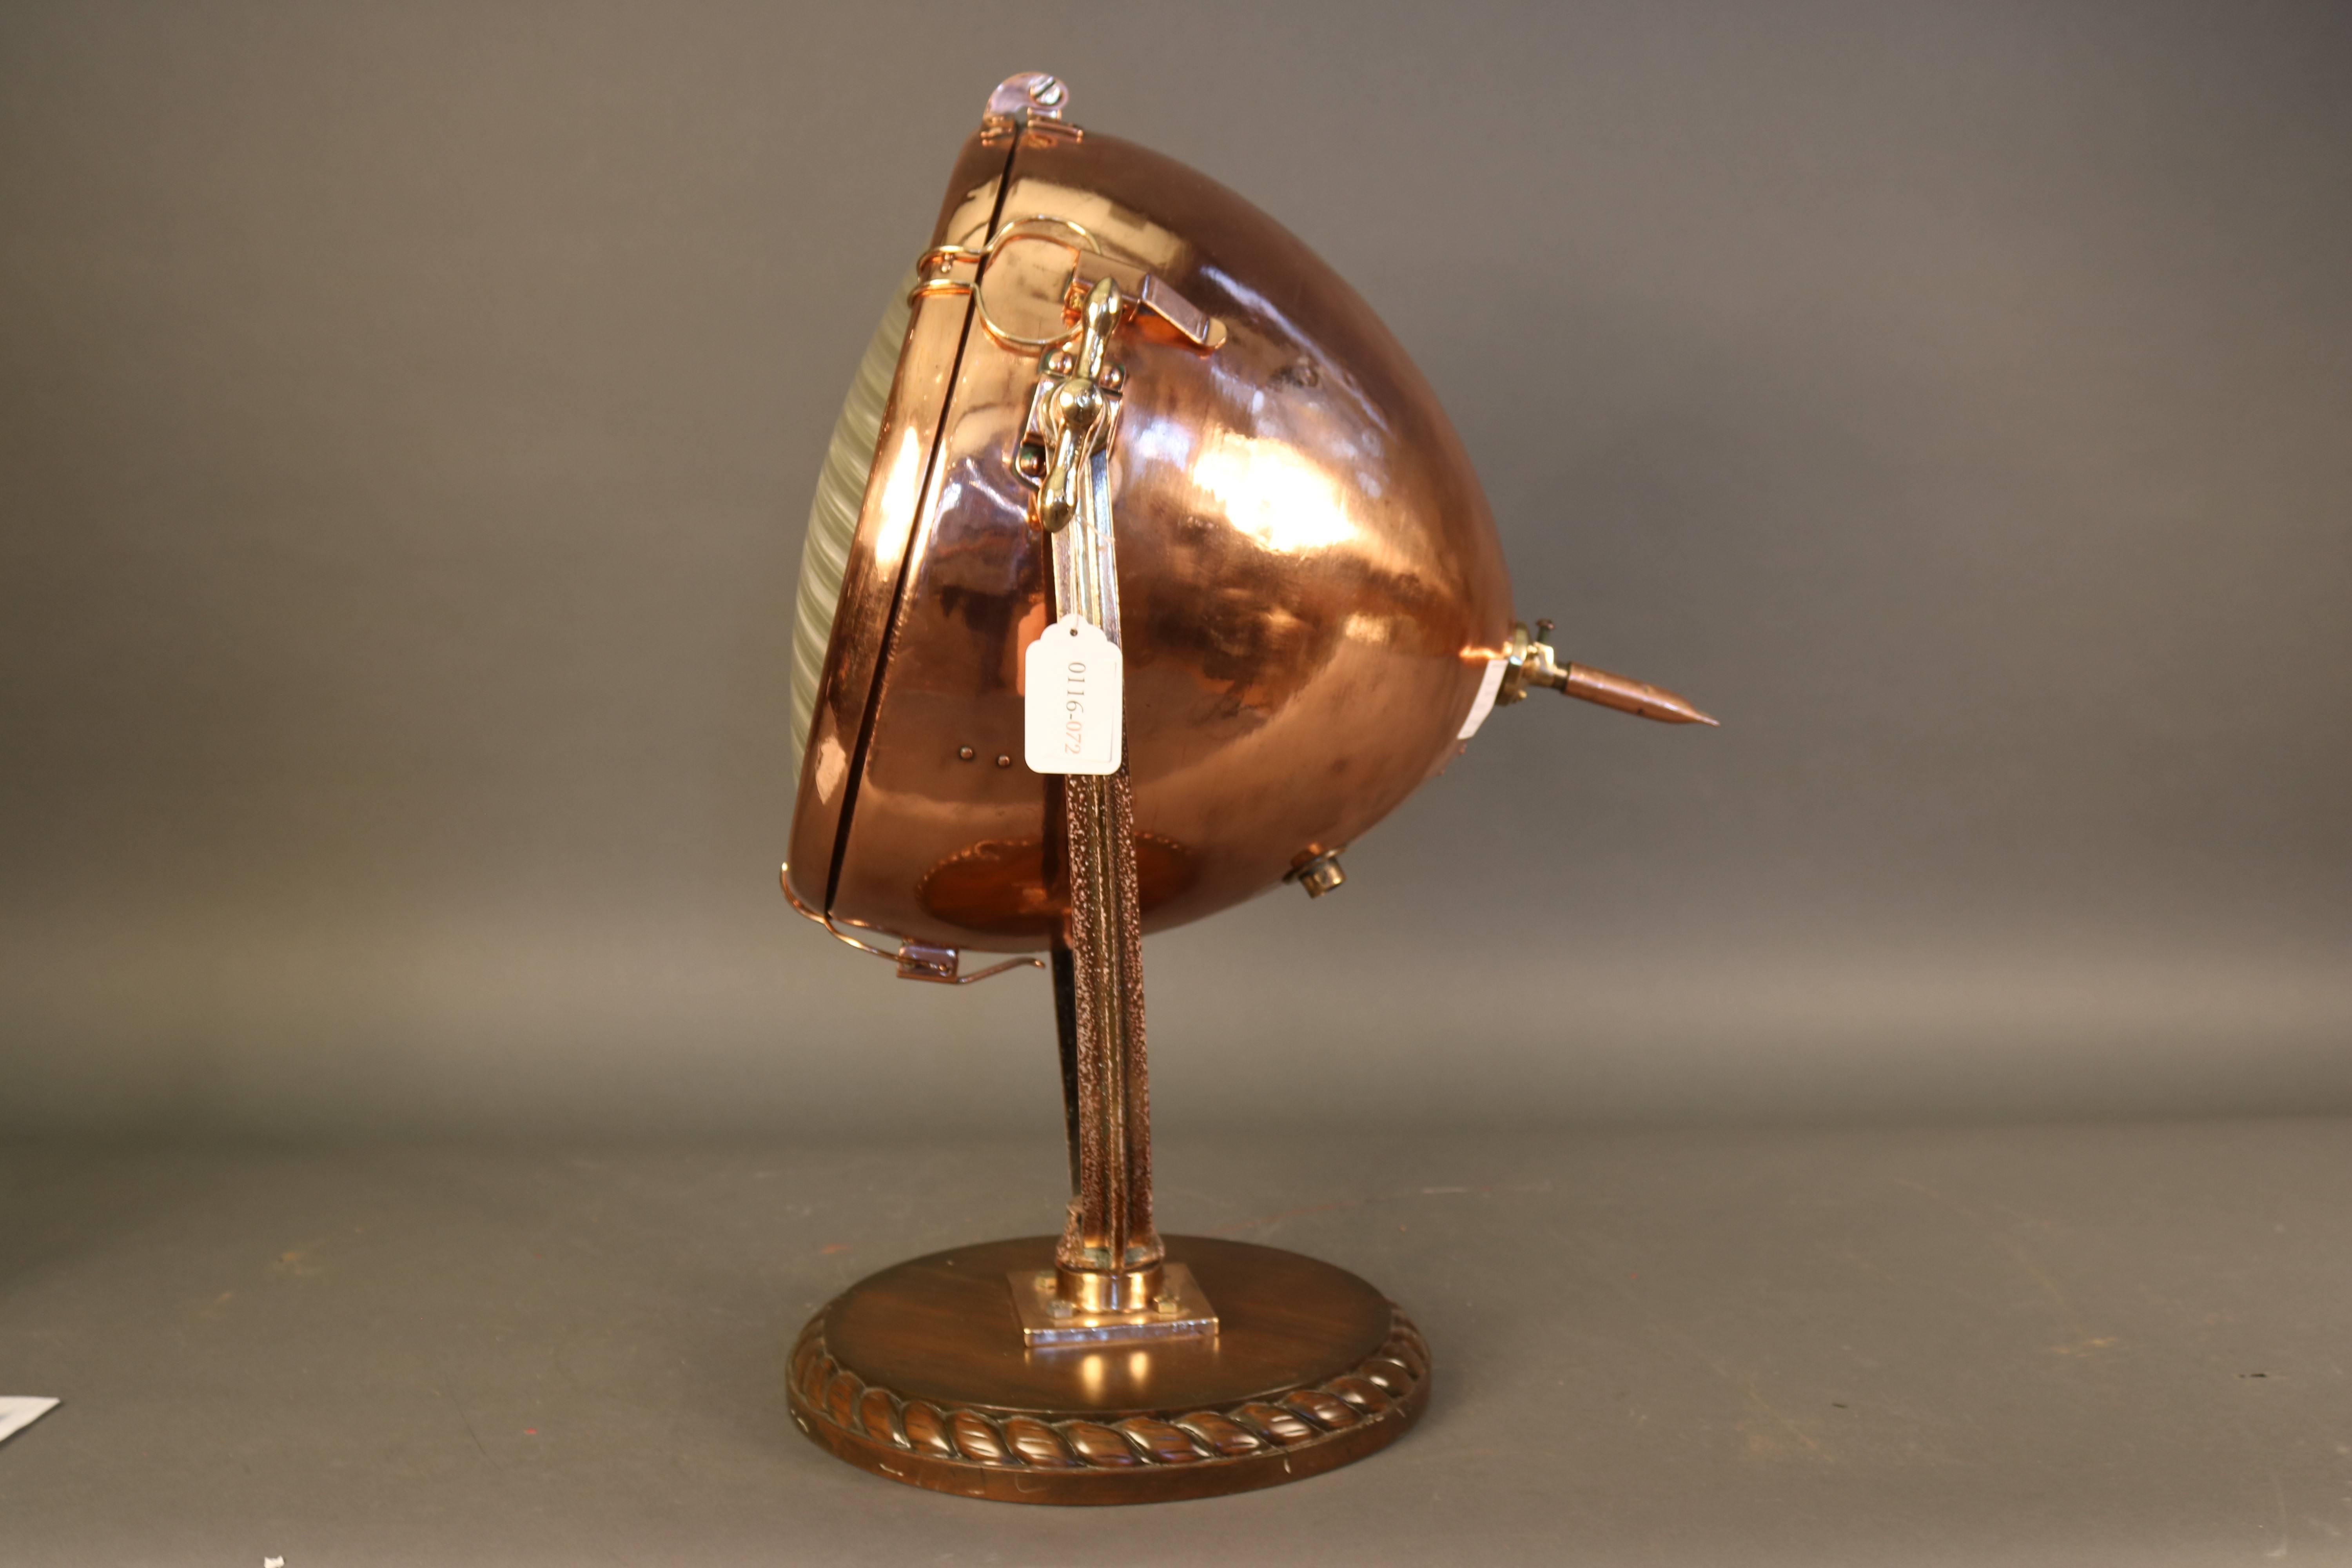 Copper yacht or ship floodlight with ribbed glass lens by General Electric. Mounted to a round mahogany base with rope carving.